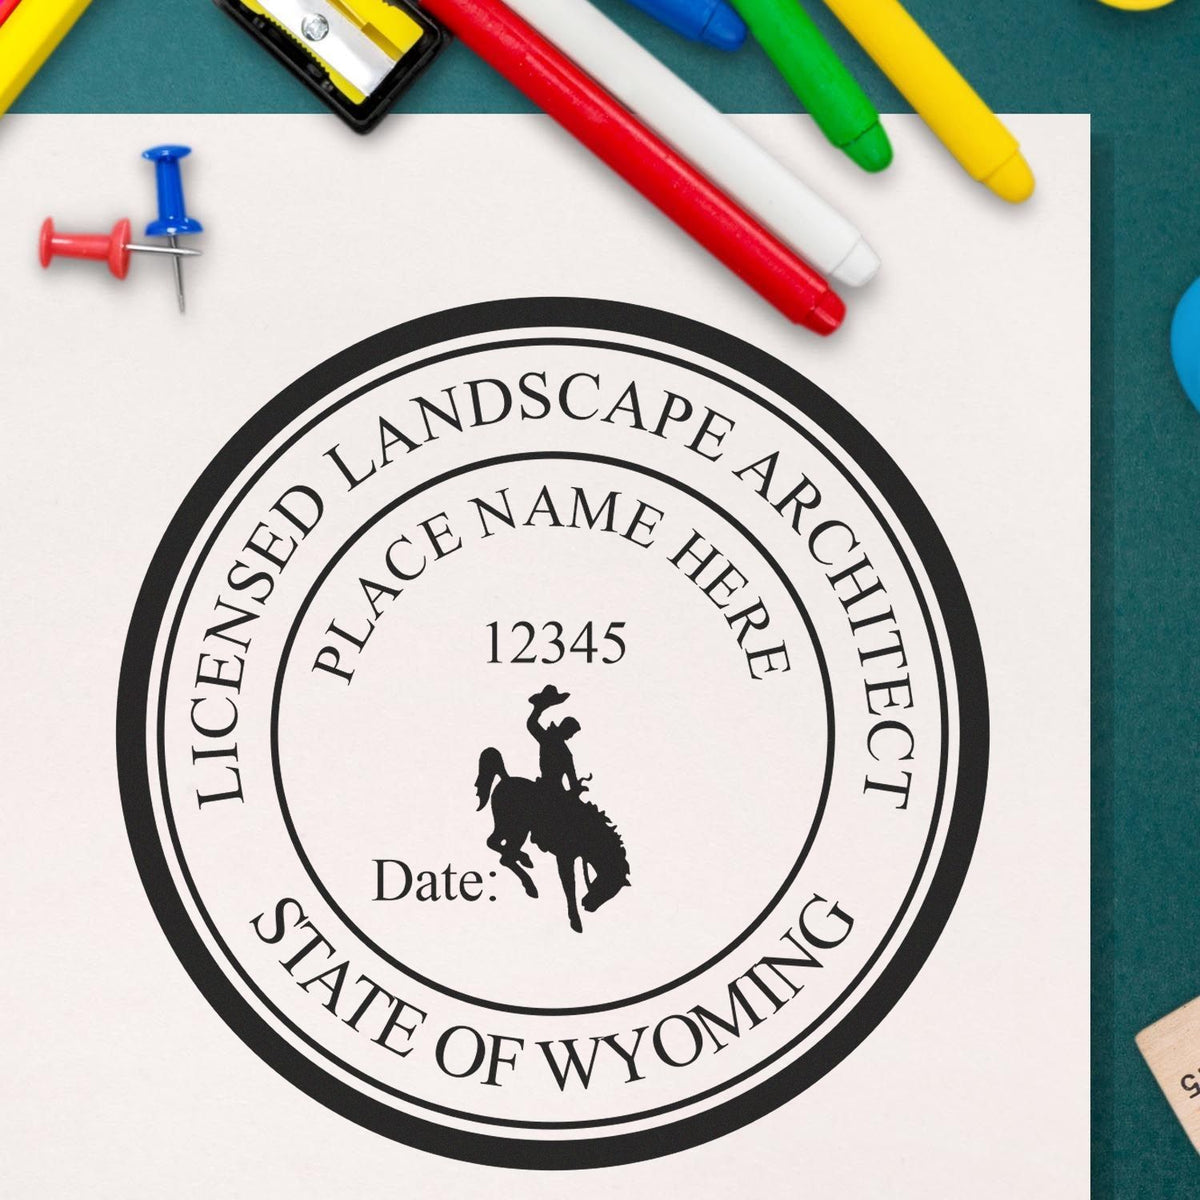 This paper is stamped with a sample imprint of the Wyoming Landscape Architectural Seal Stamp, signifying its quality and reliability.